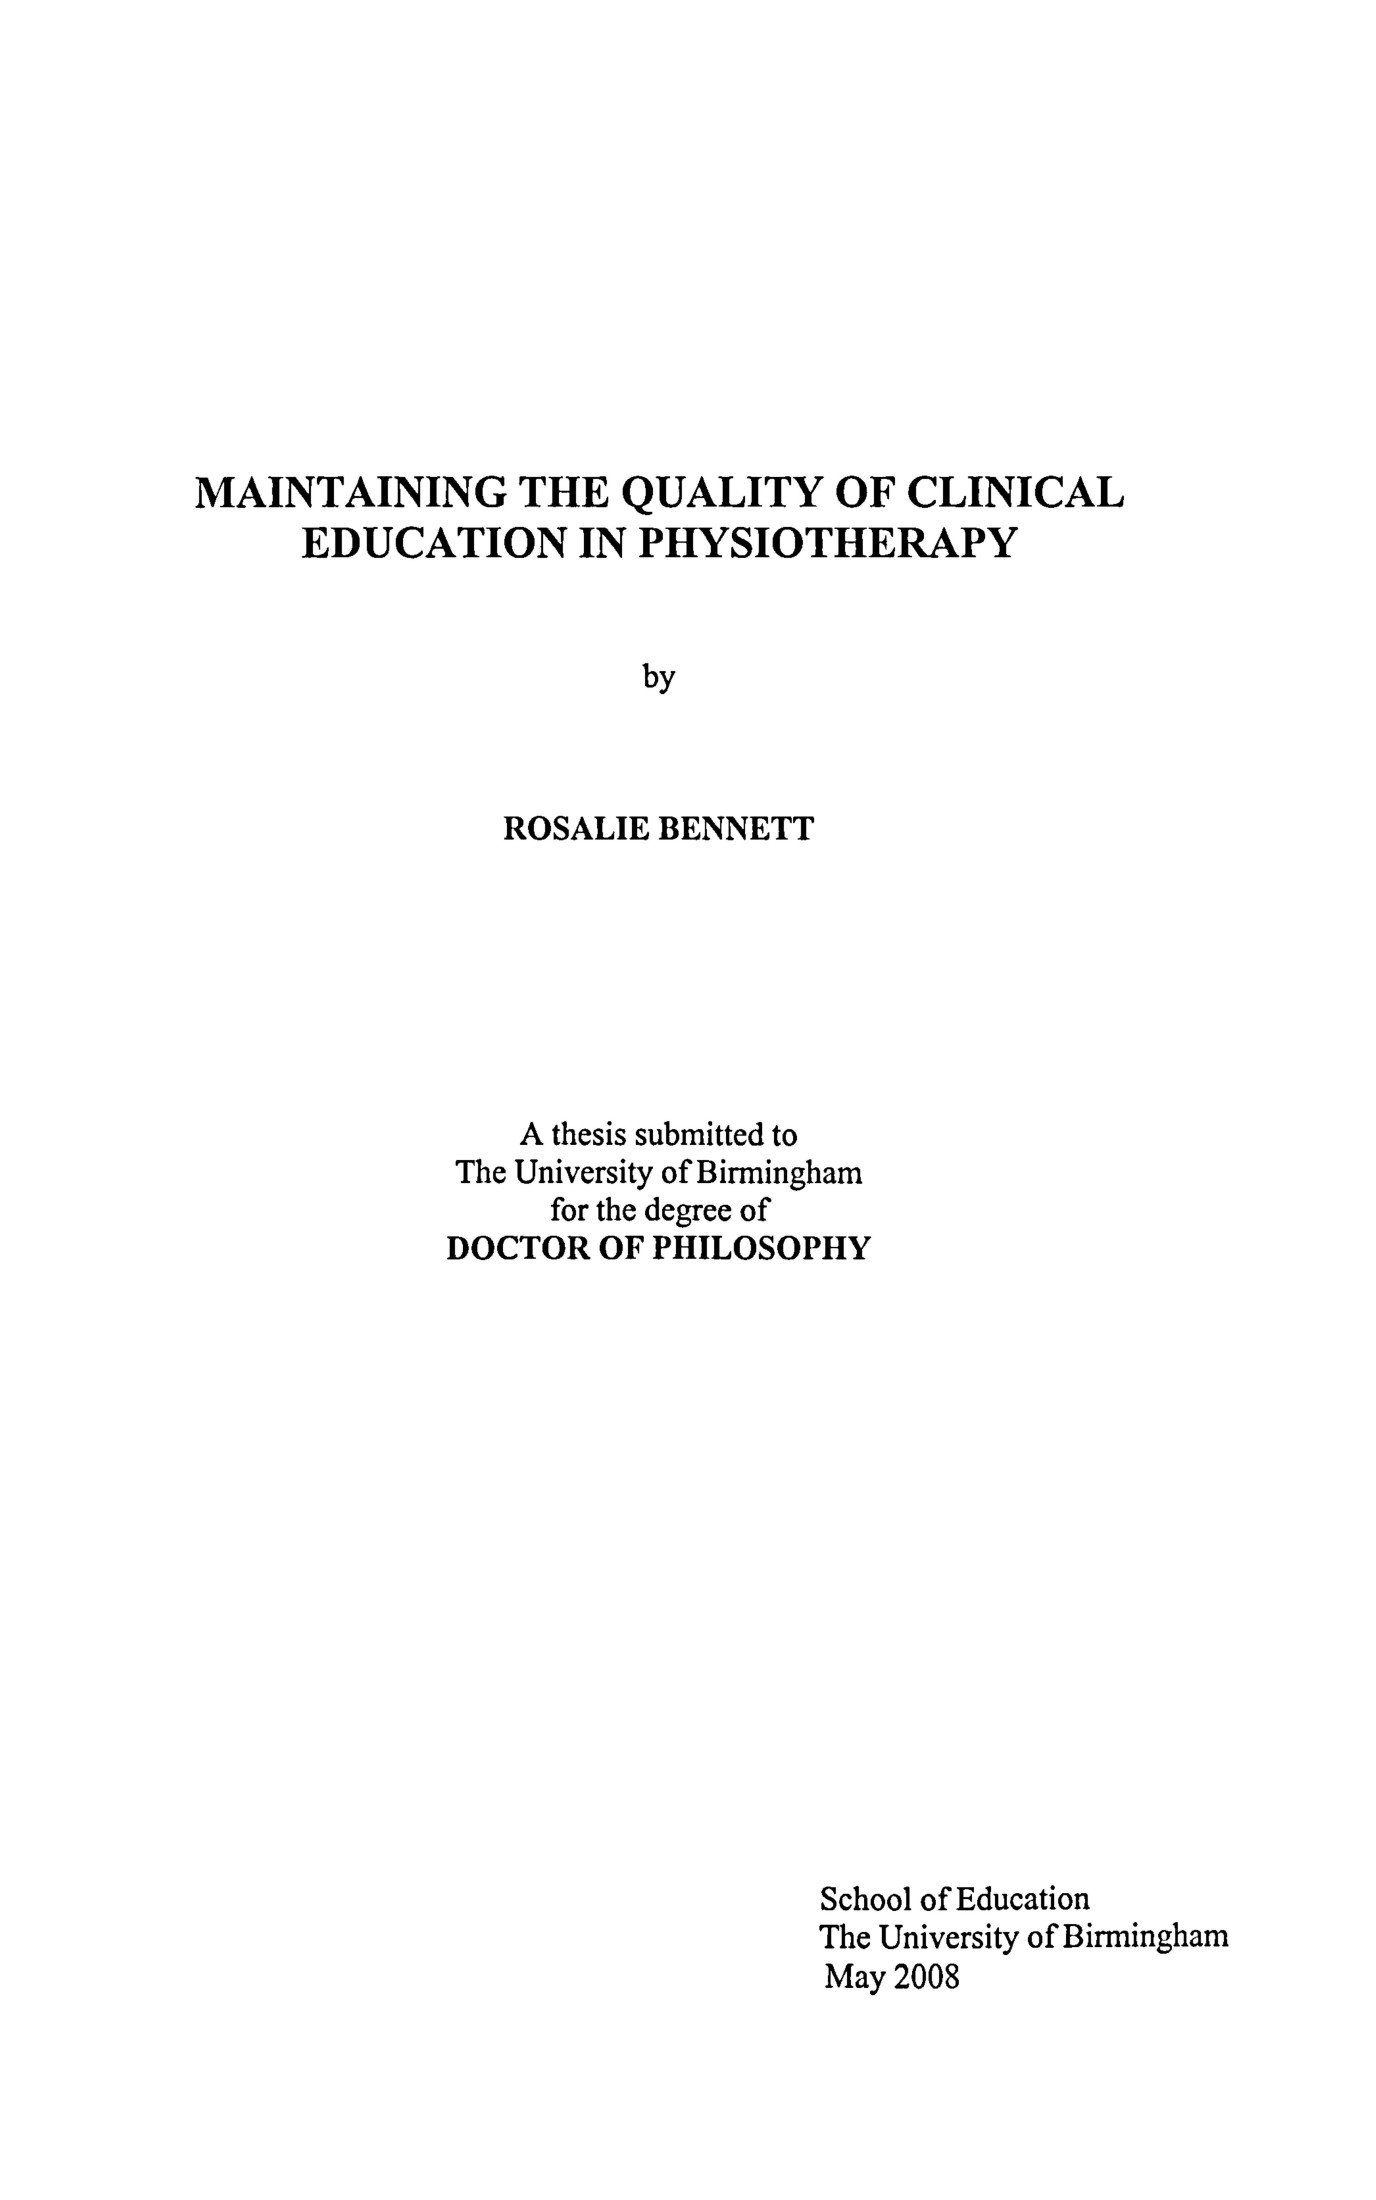 Maintaining the quality of clinical education in physiotherapy